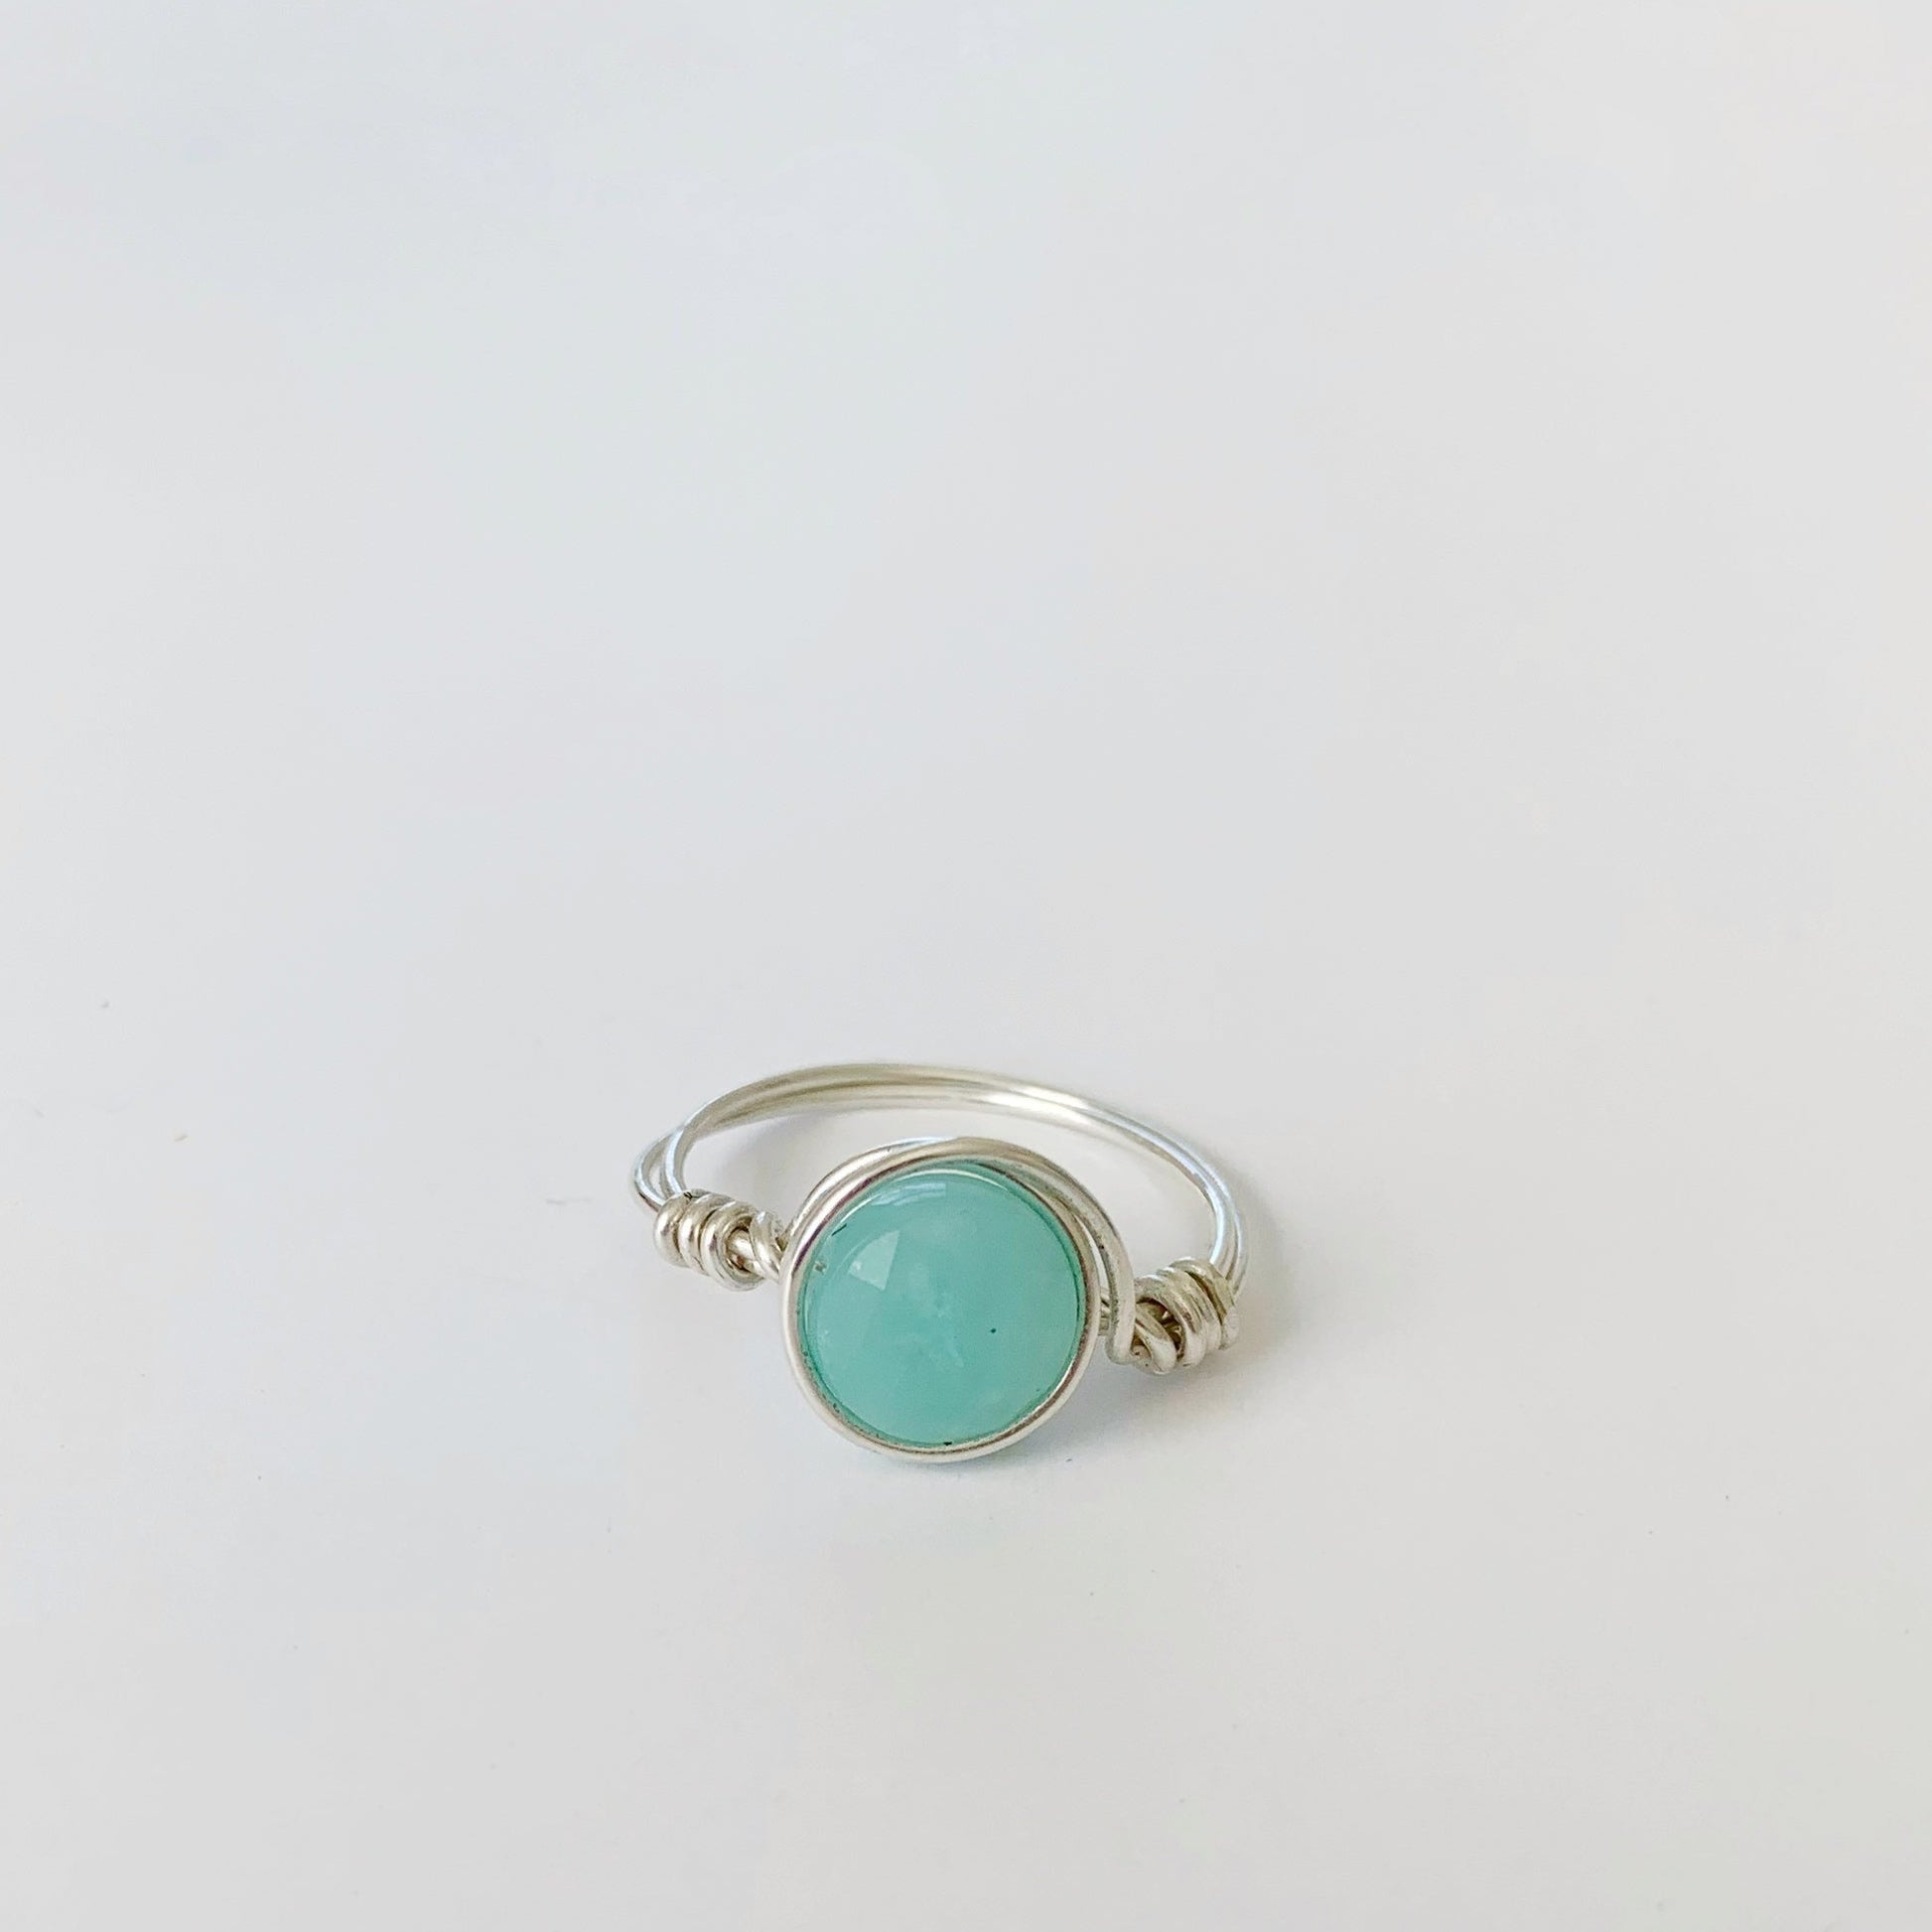 Mermaids and Madeleines Captiva Ring in sterling silver is a wire wrapped ring with an amazonite bead. this ring is pictured on a white surface